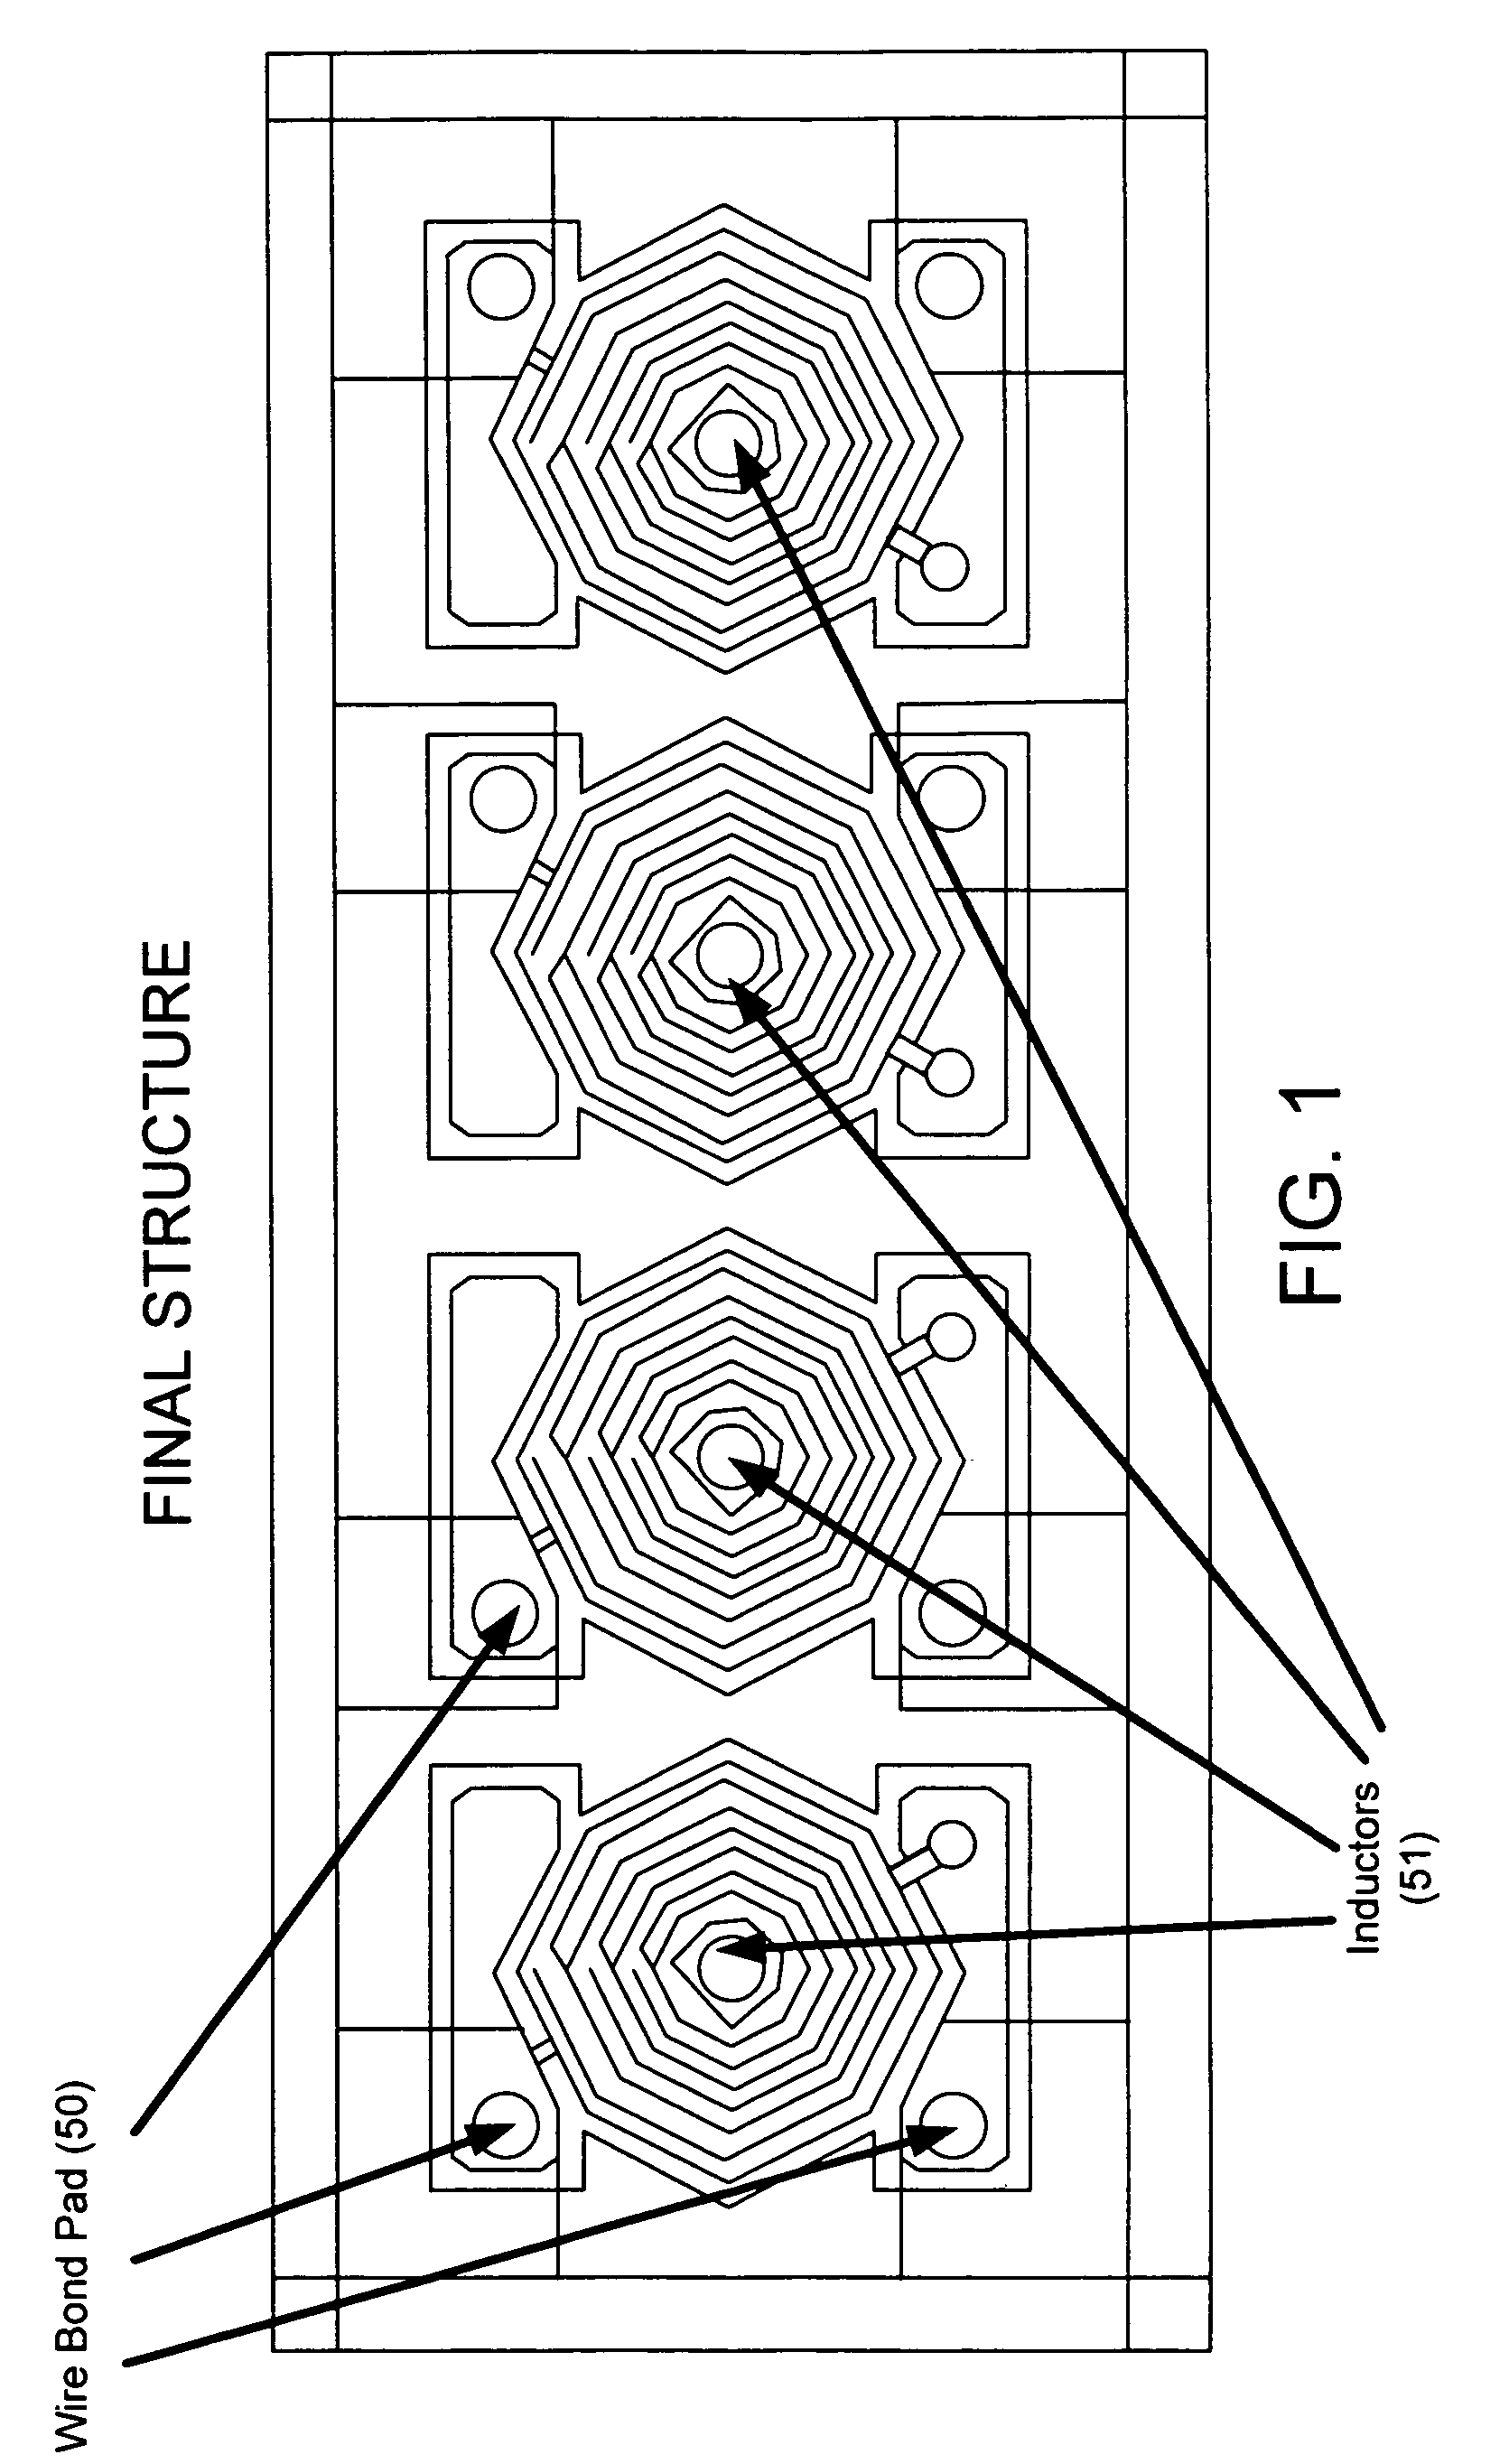 Wire bond and redistribution layer process